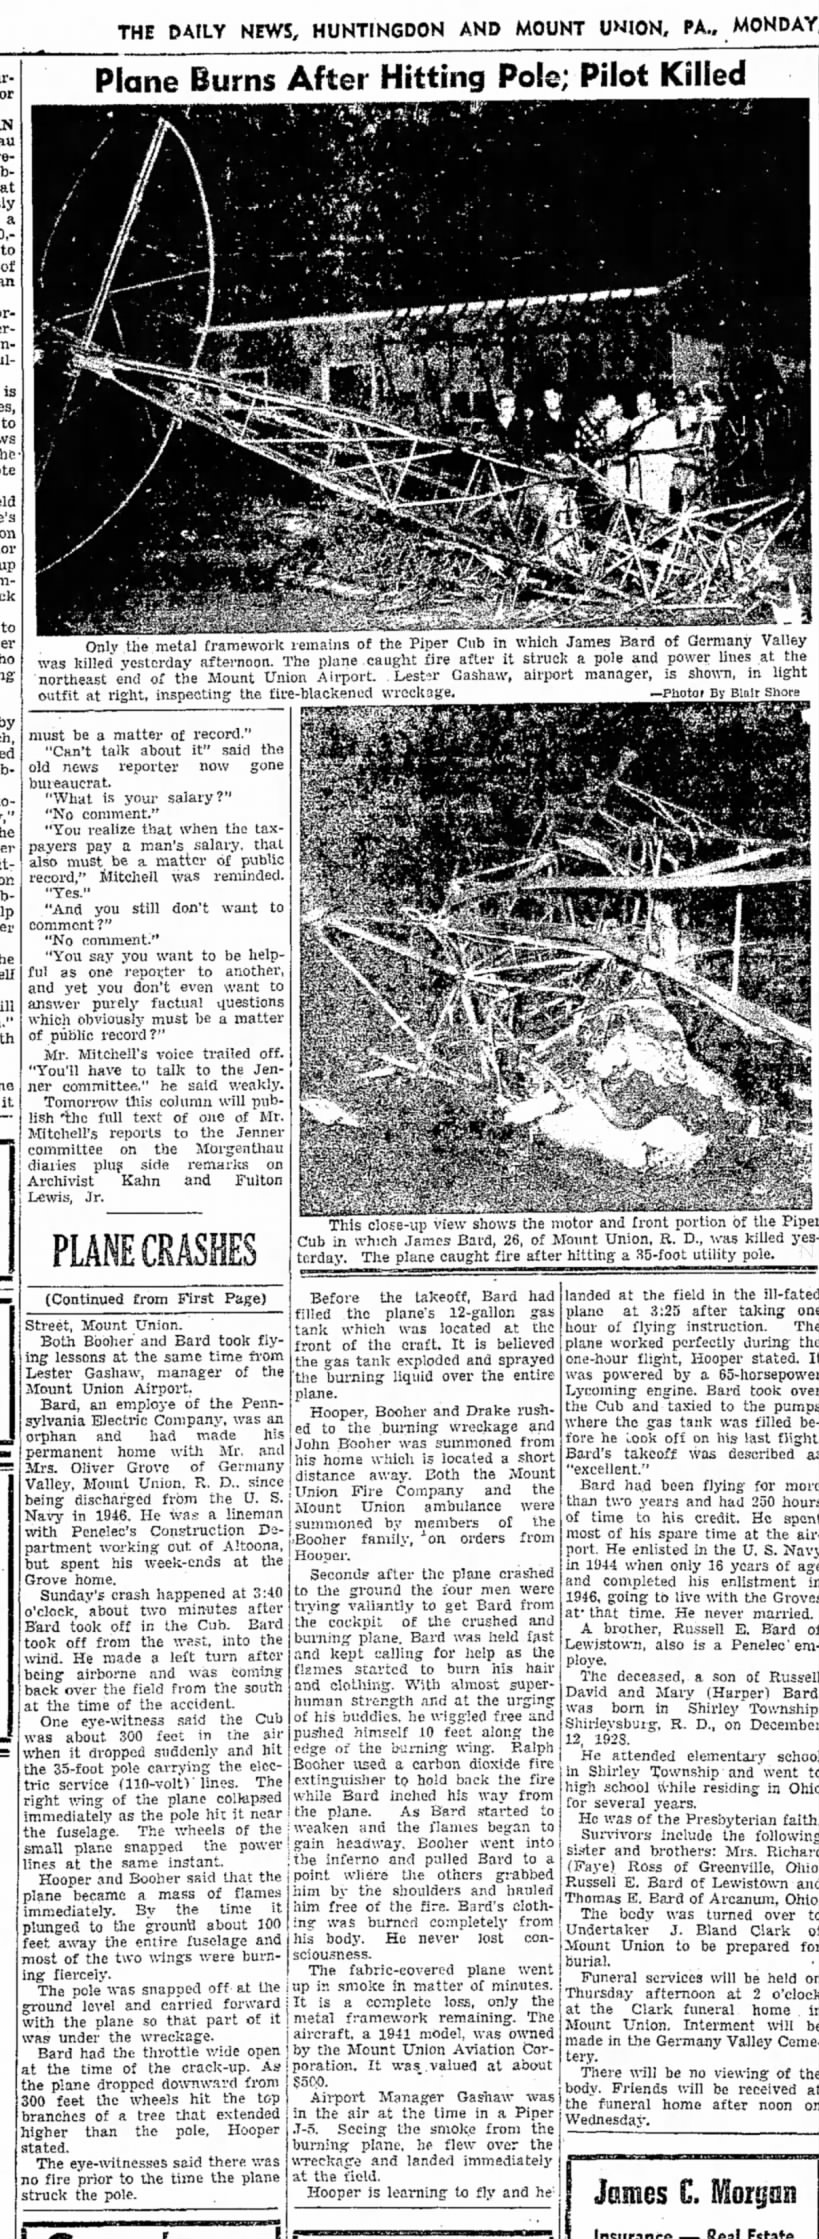 James Bard dies in plane wreck-TDN-p.12-18 Oct 1954 continued